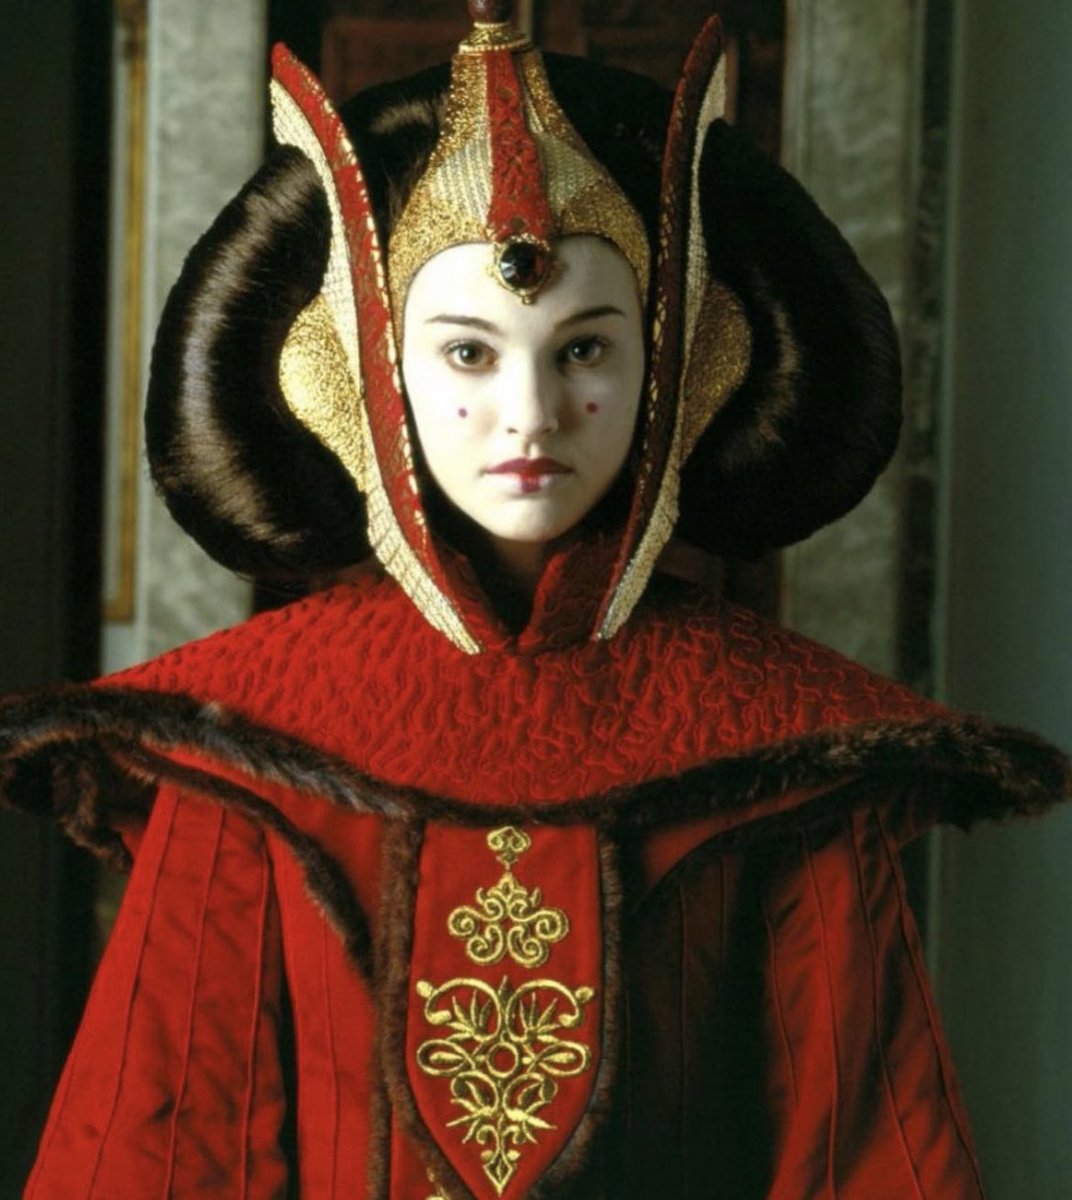 Natalie Portman on 25th anniversary of Episode I on Instagram

“25 years since the premiere of Phantom Menace…and now it’s coming back to theaters for a limited time starting today! Still in awe of all the people who brought these films to life and George Lucas’ storytelling”